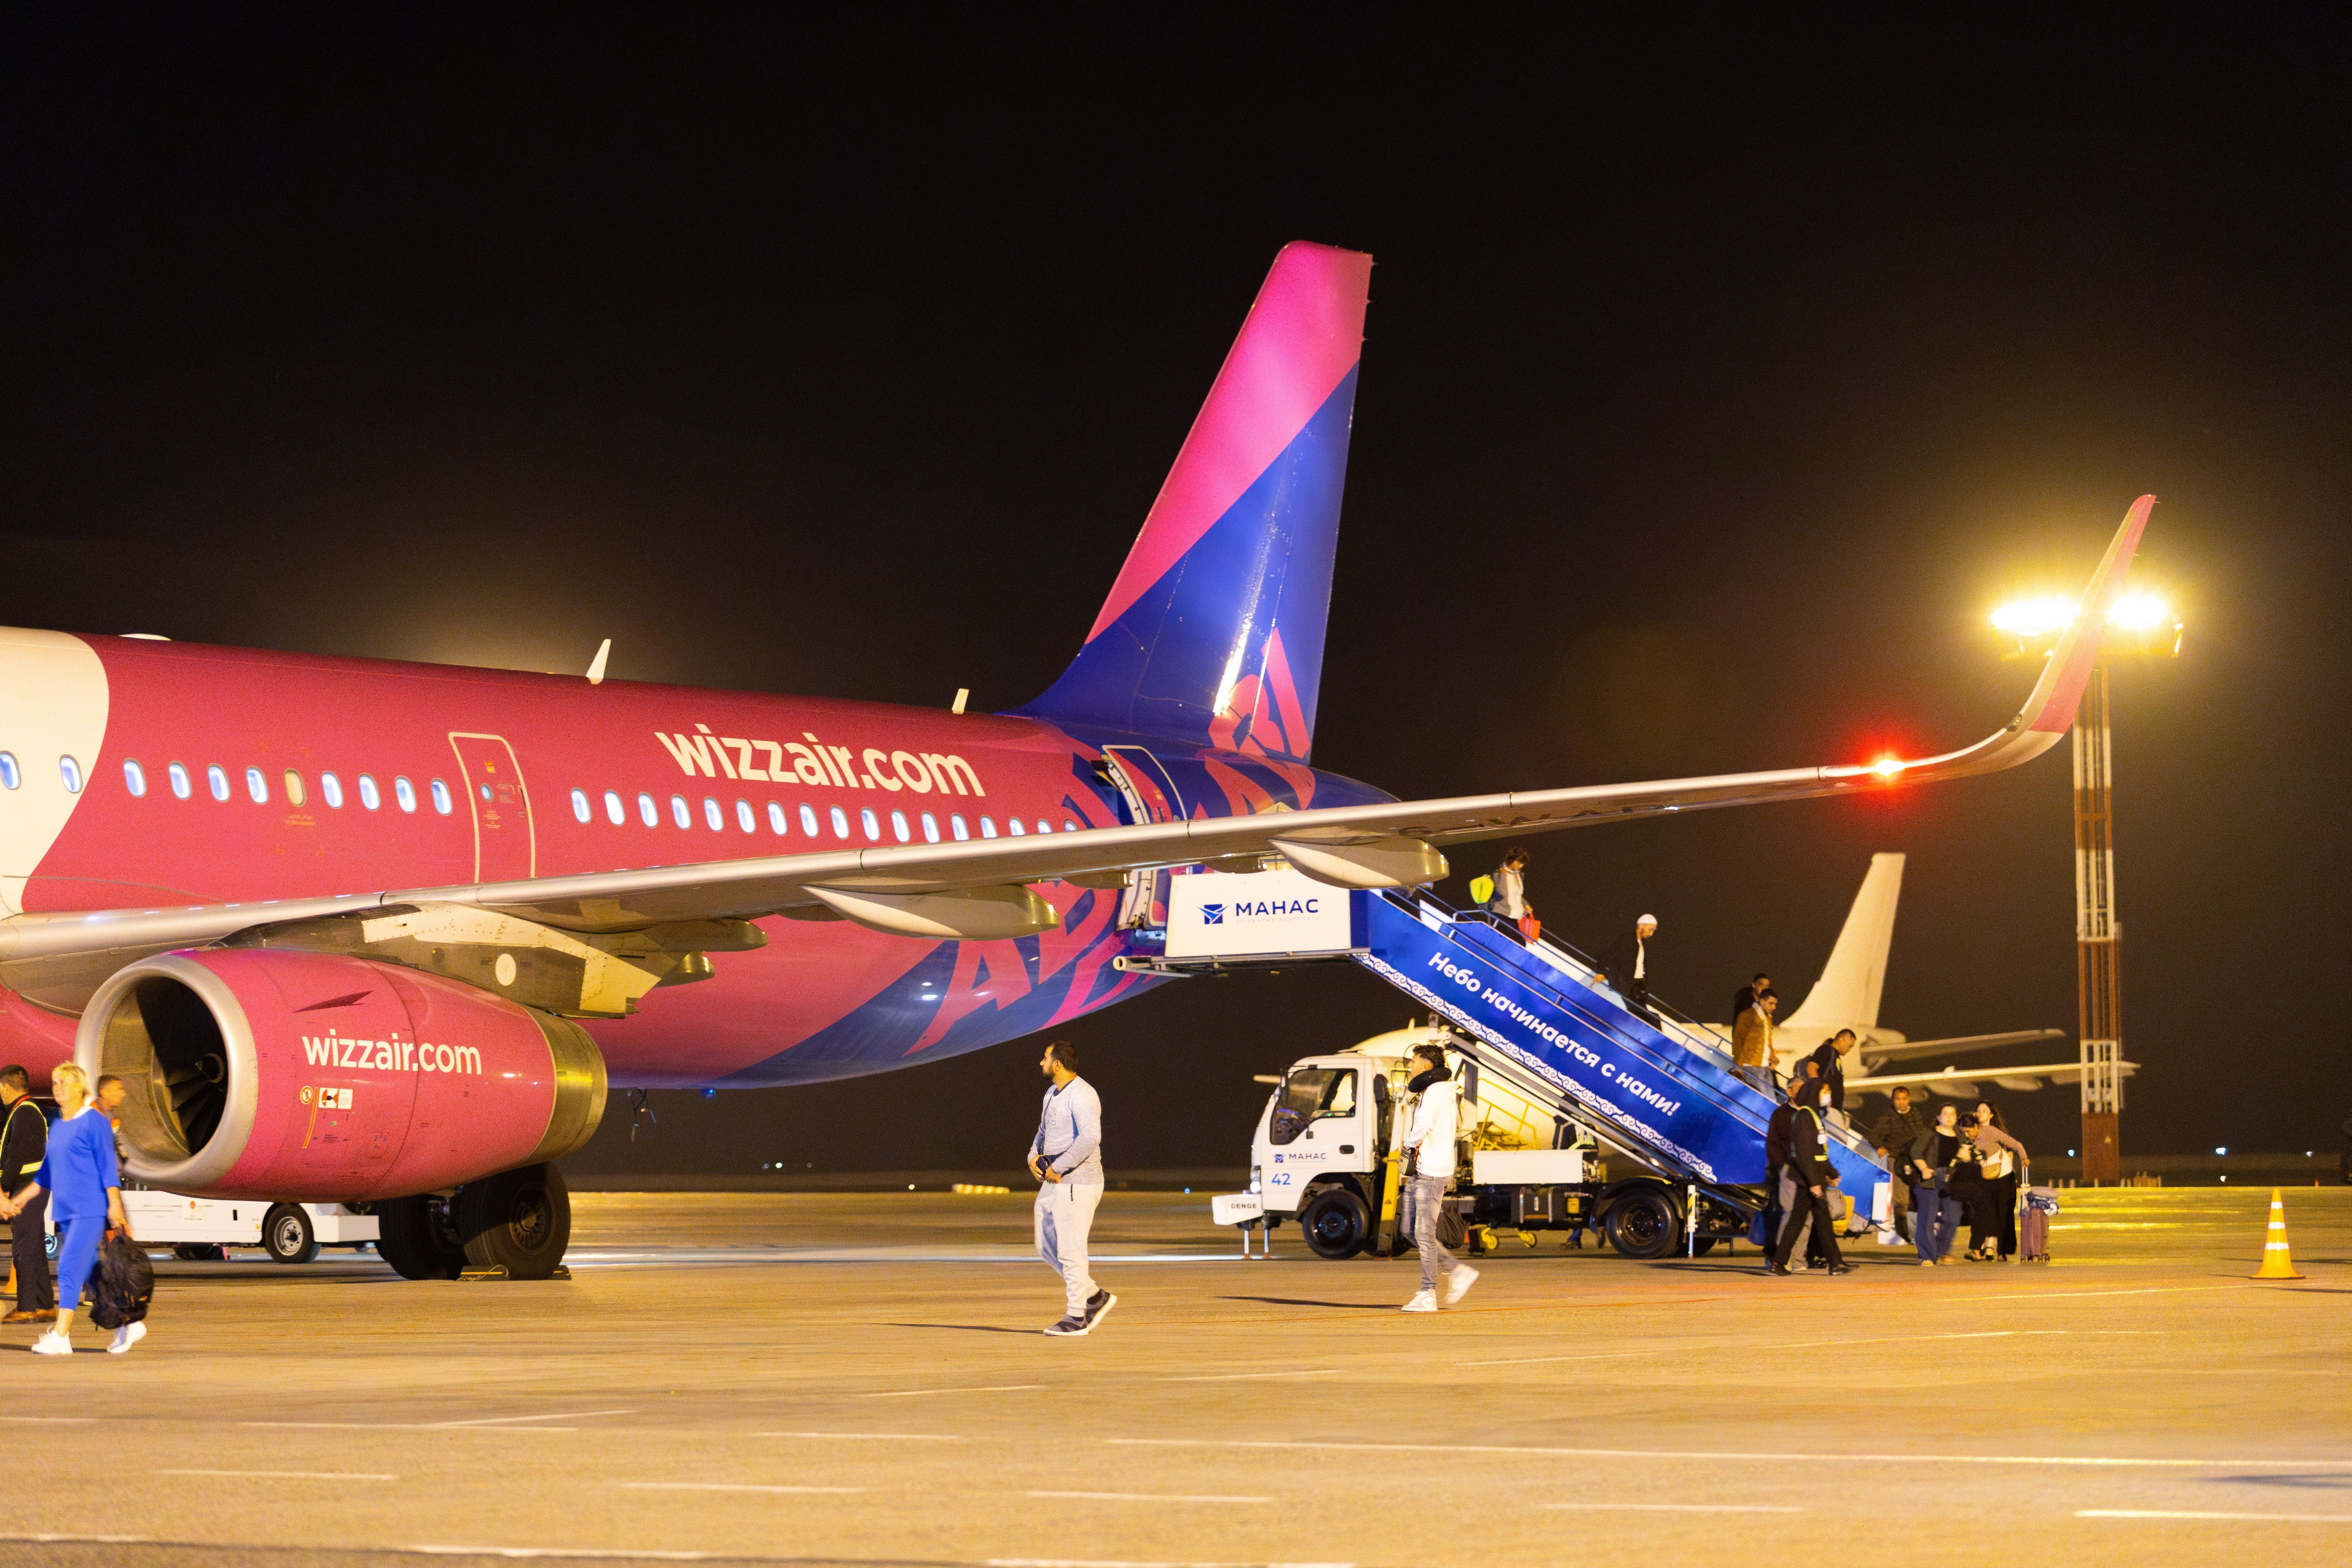 Wizz Air A321 on the ground at night shutterstock_2418442913